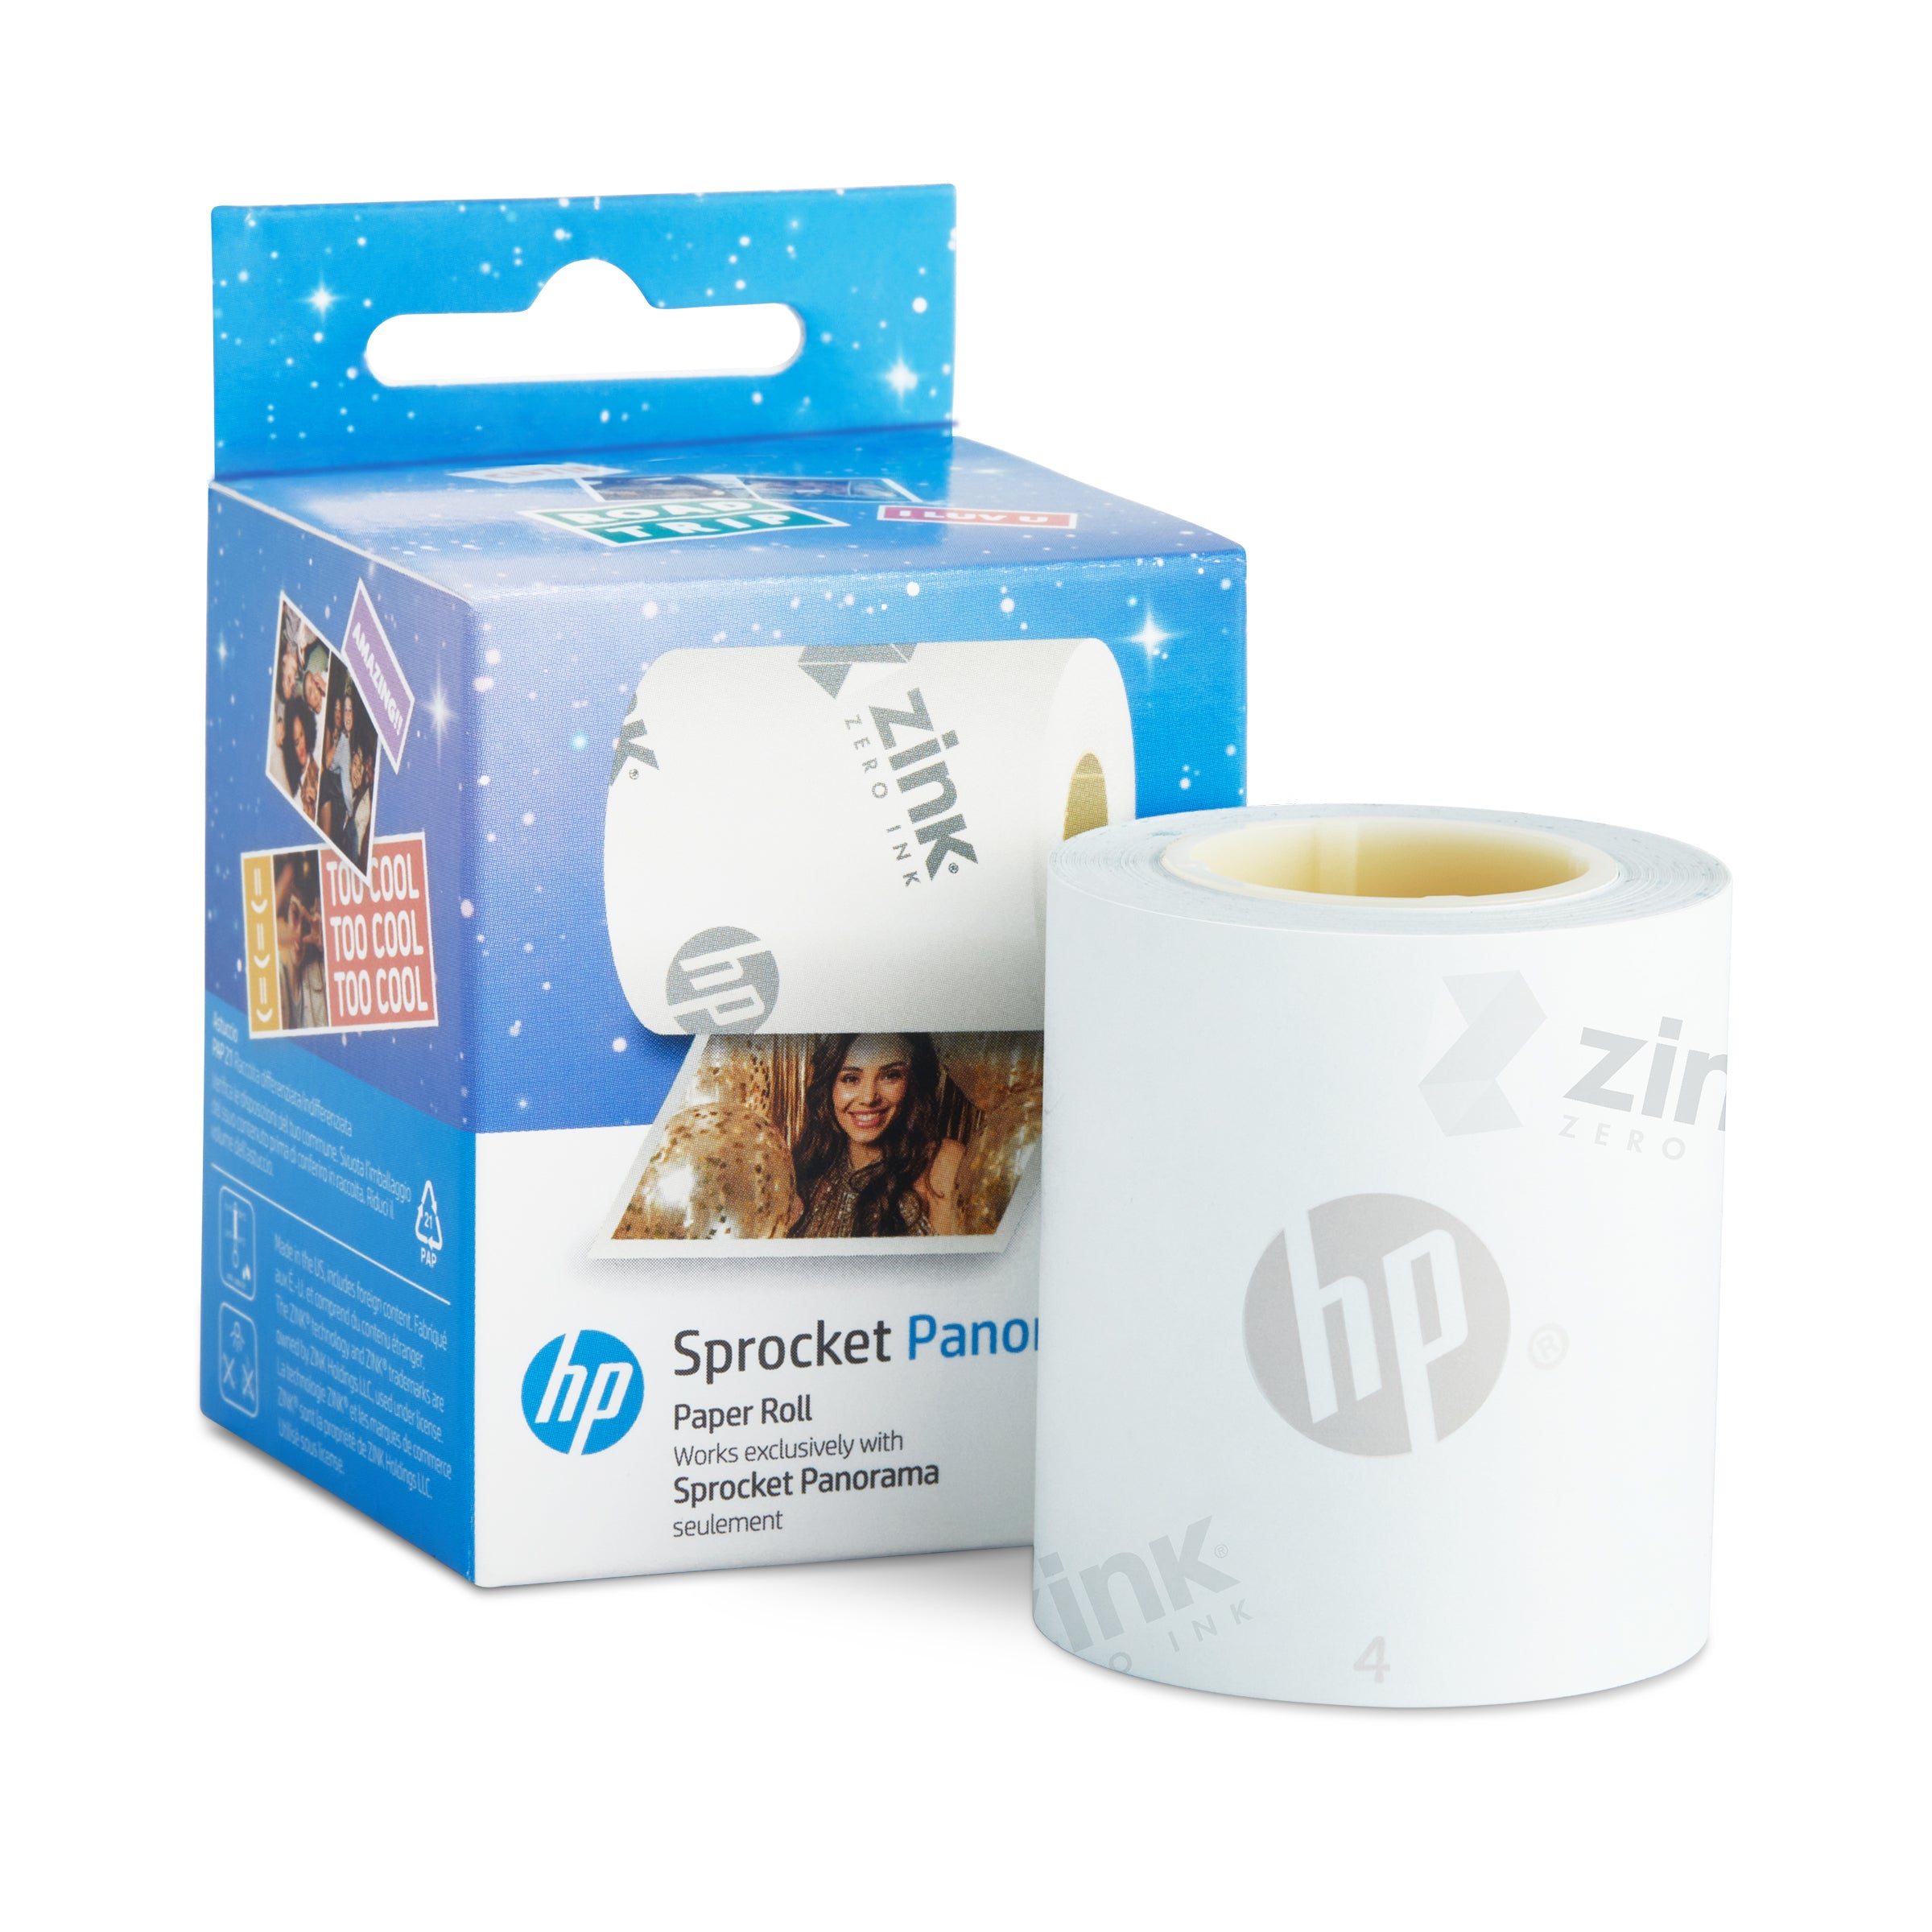 HP Sprocket Panorama Instant Portable Color Label & Photo Printer (Grey) Starter Bundle with case and HP Zink roll Sprocket Printers CA